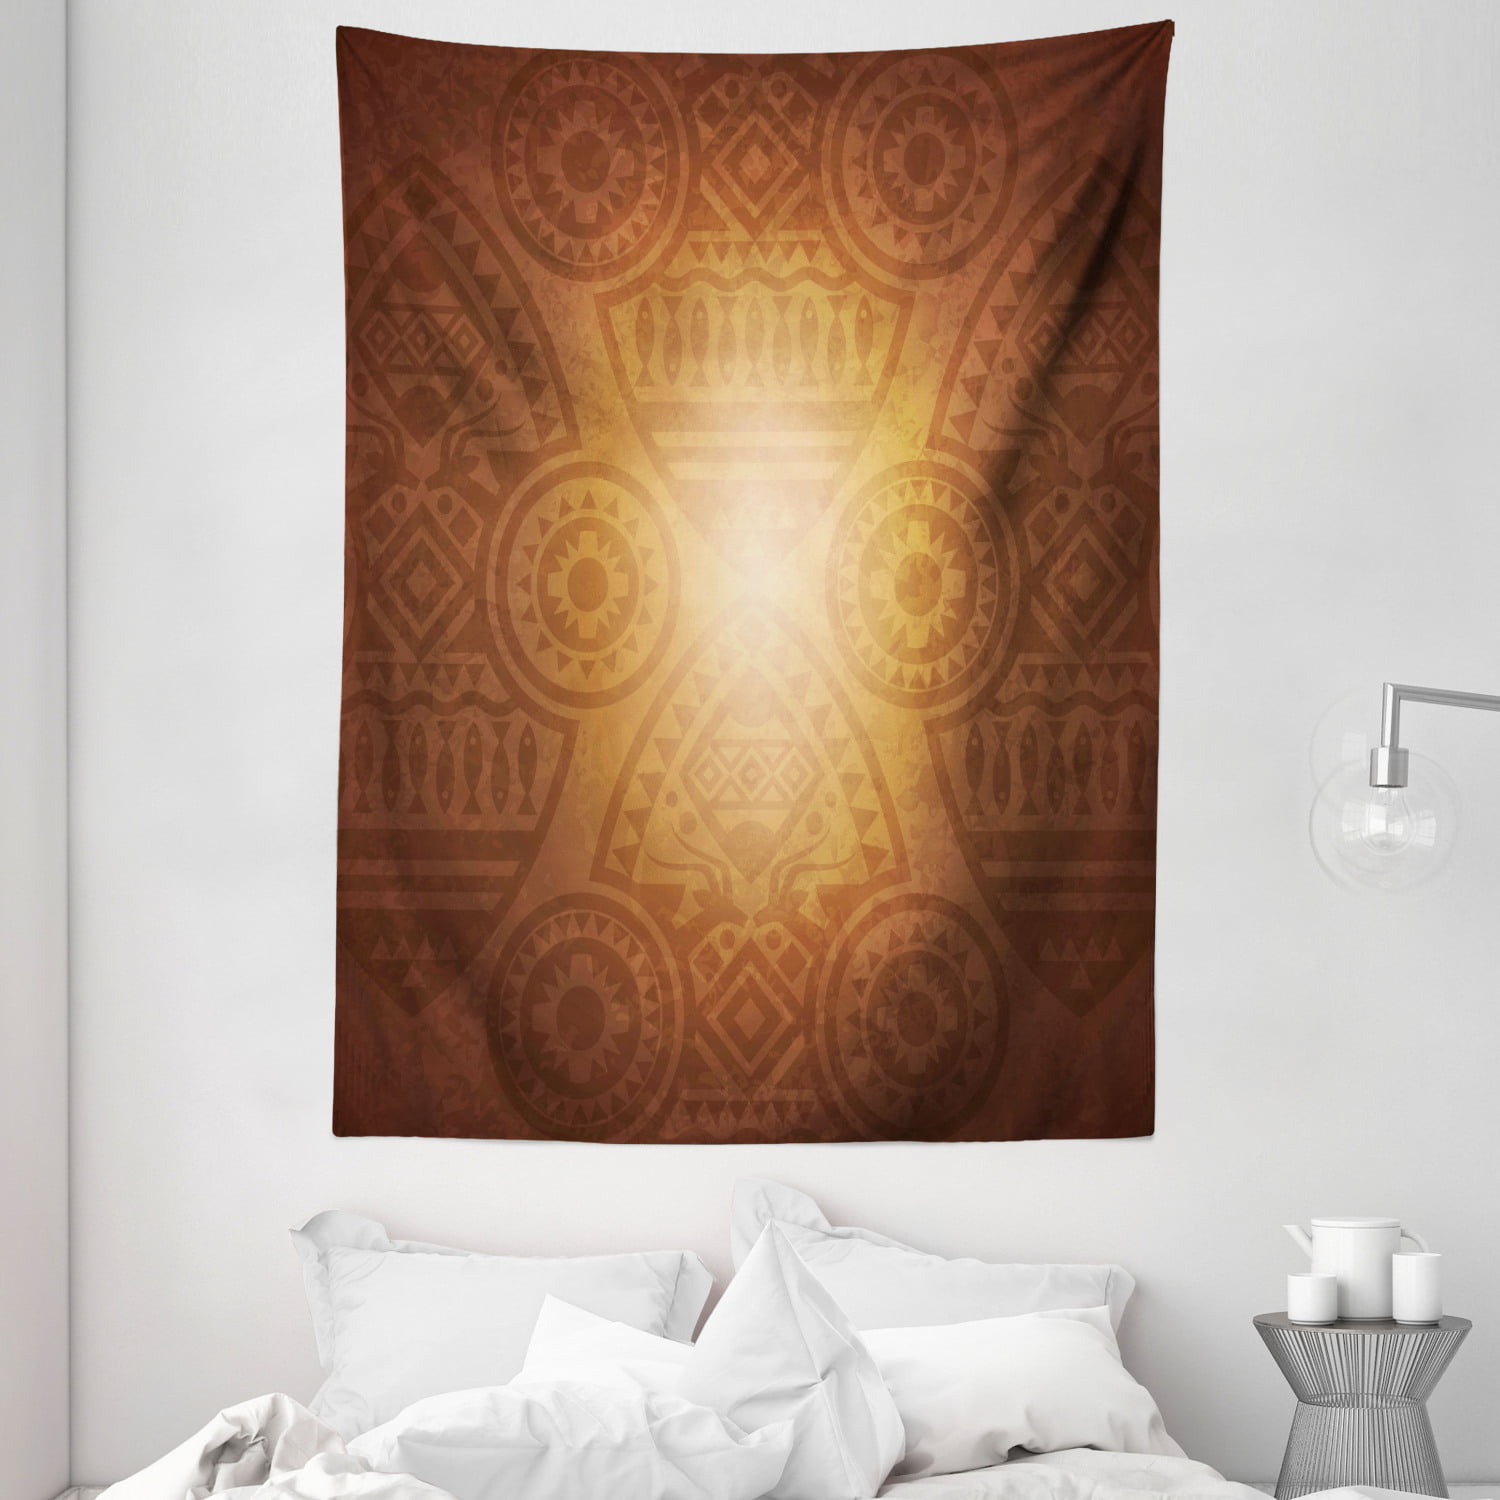 African Animals Silhouettes Wall Hanging Tapestry Bohemian Bedspread Dorm 